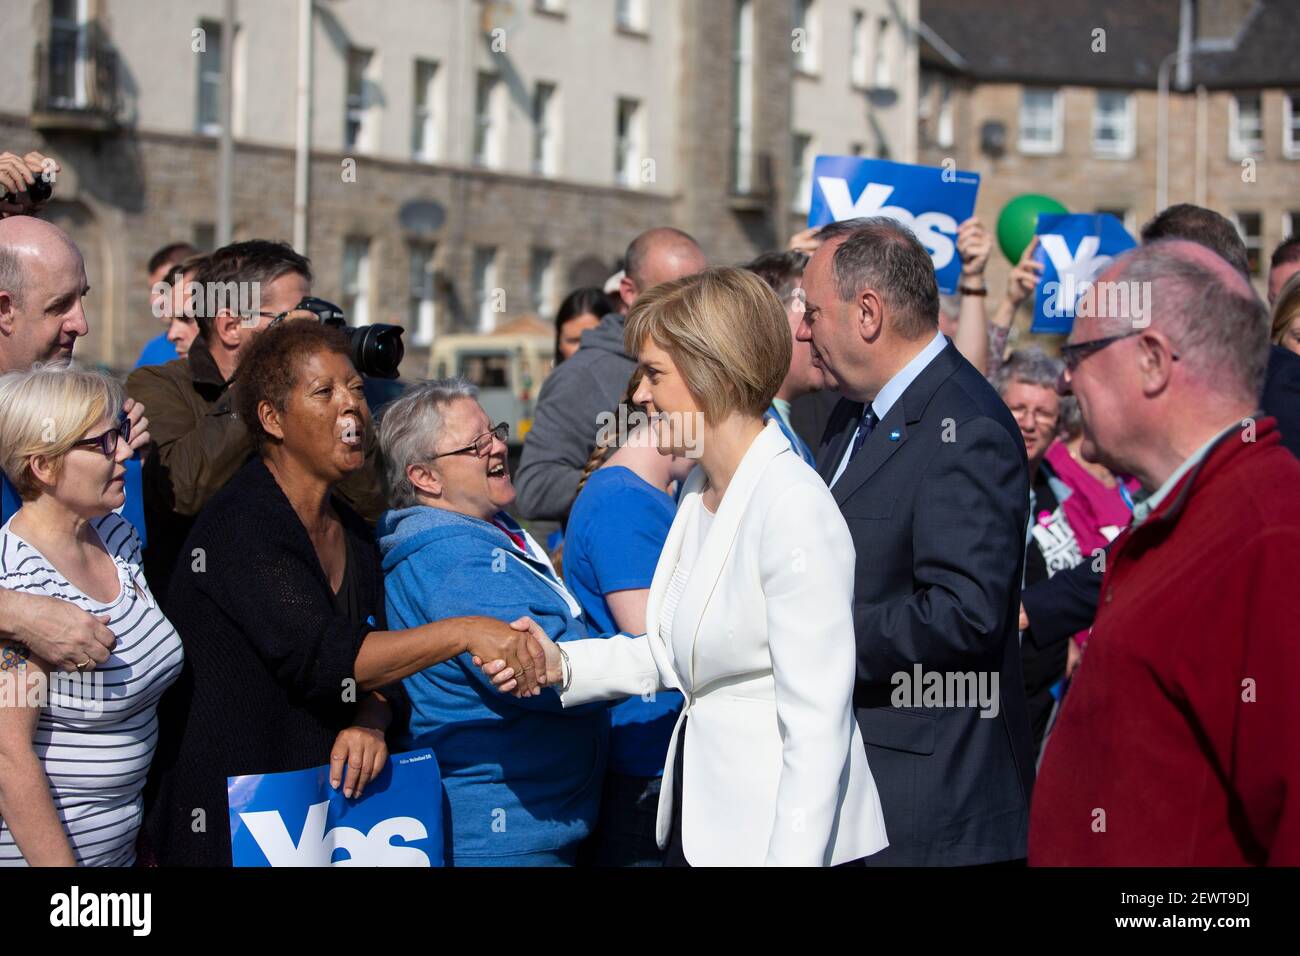 Edinburgh, Scotland. 10 September 2014. First Minister Alex Salmond and Deputy First Minister. Nicola Sturgeon join with figures from across the Yes m Stock Photo